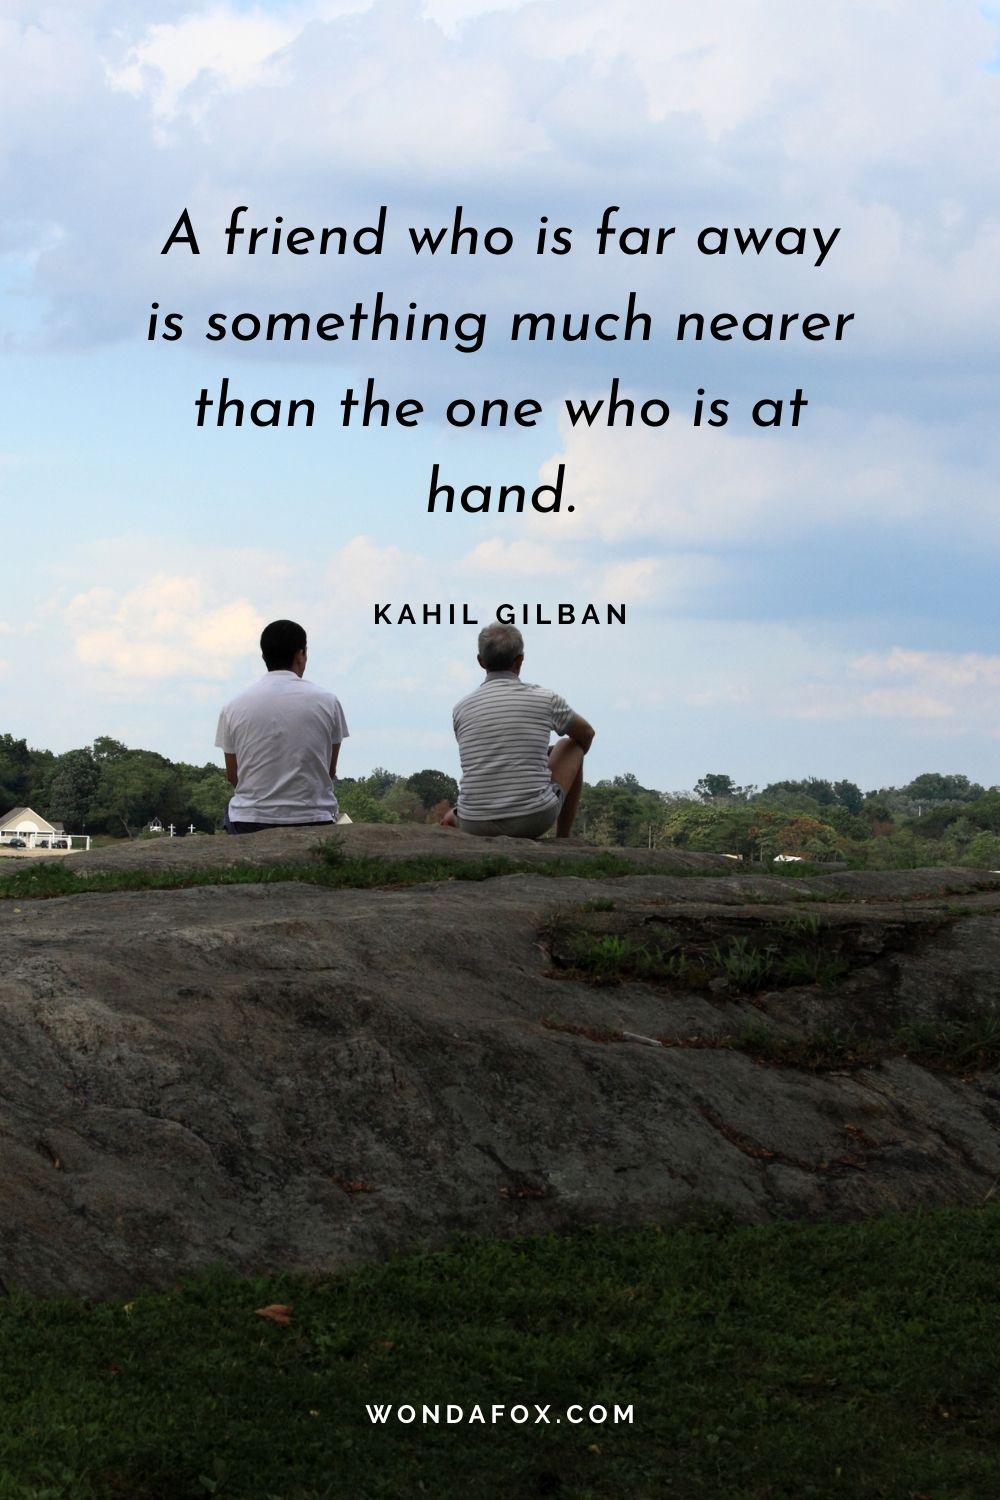 A friend who is far away is something much nearer than the one who is at hand.